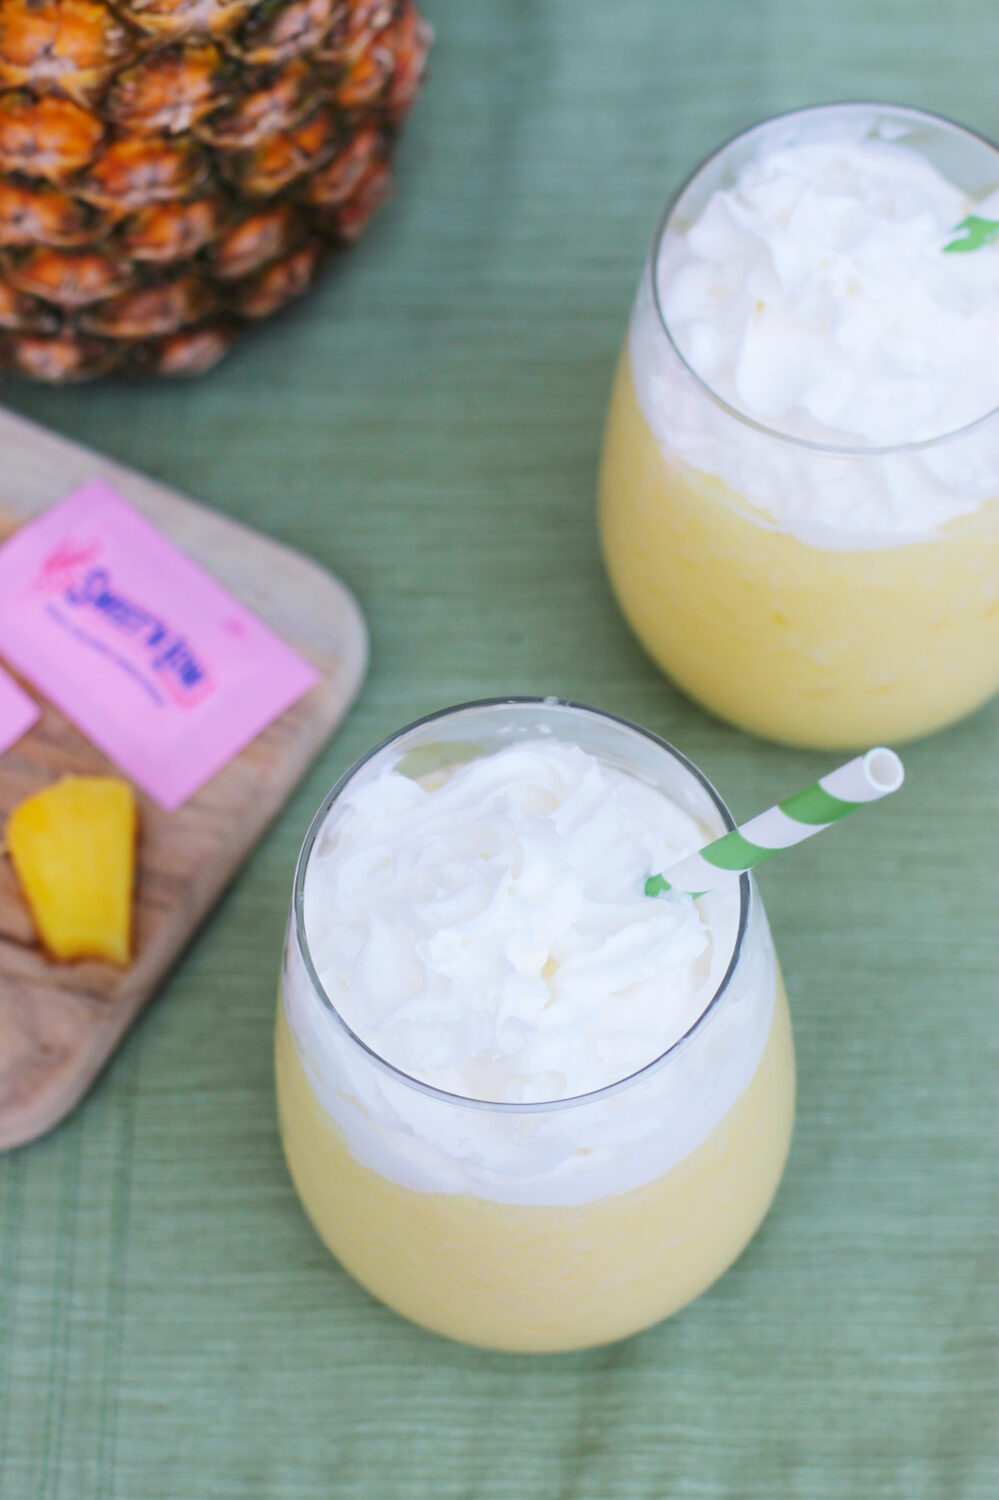 This Spiked Dole Whip cocktail recipe is perfect for warm summer nights! #donthesitaste #ad